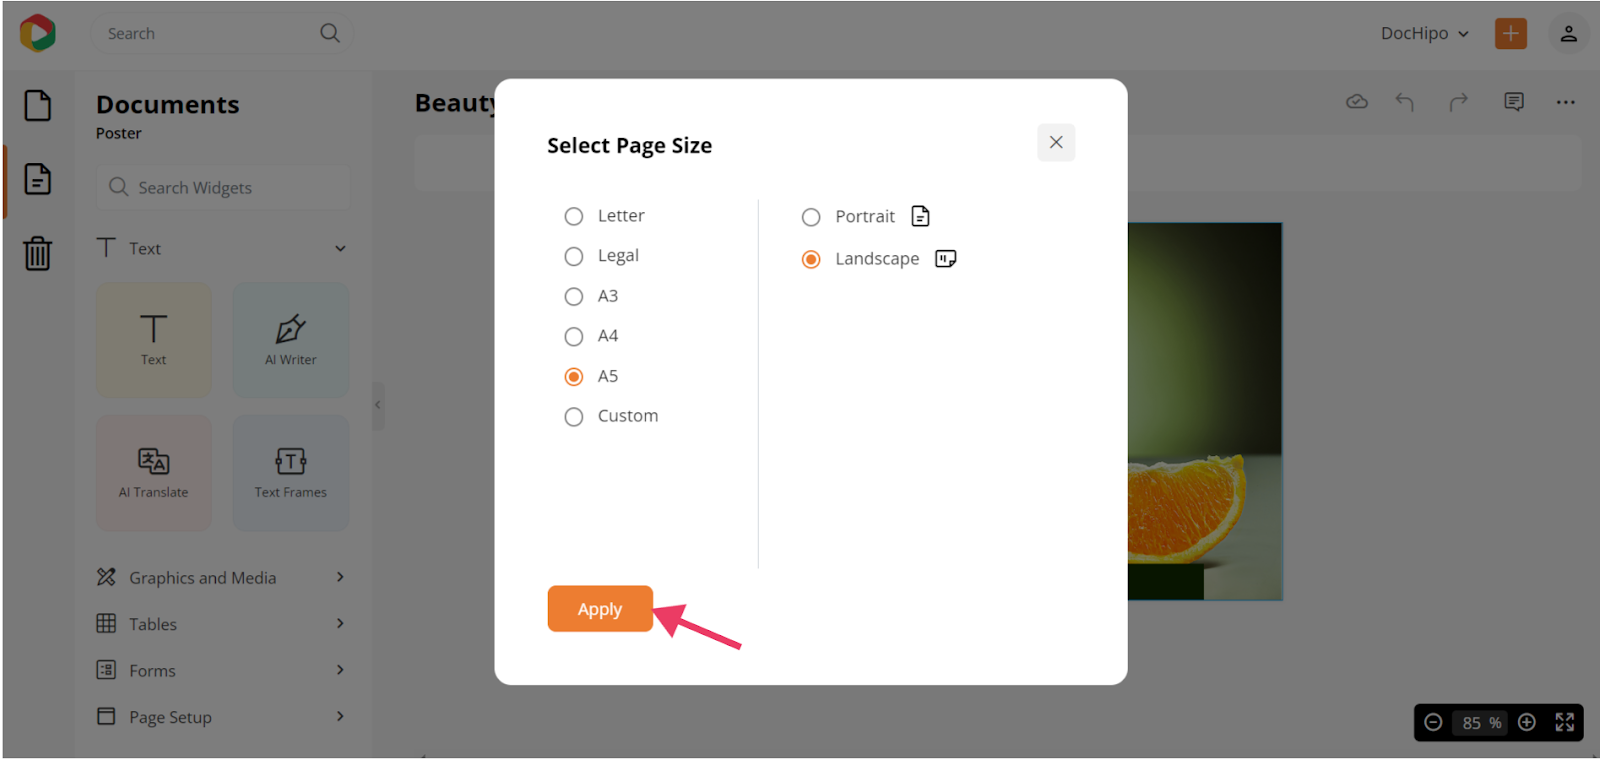 Select page size in DocHipo editor